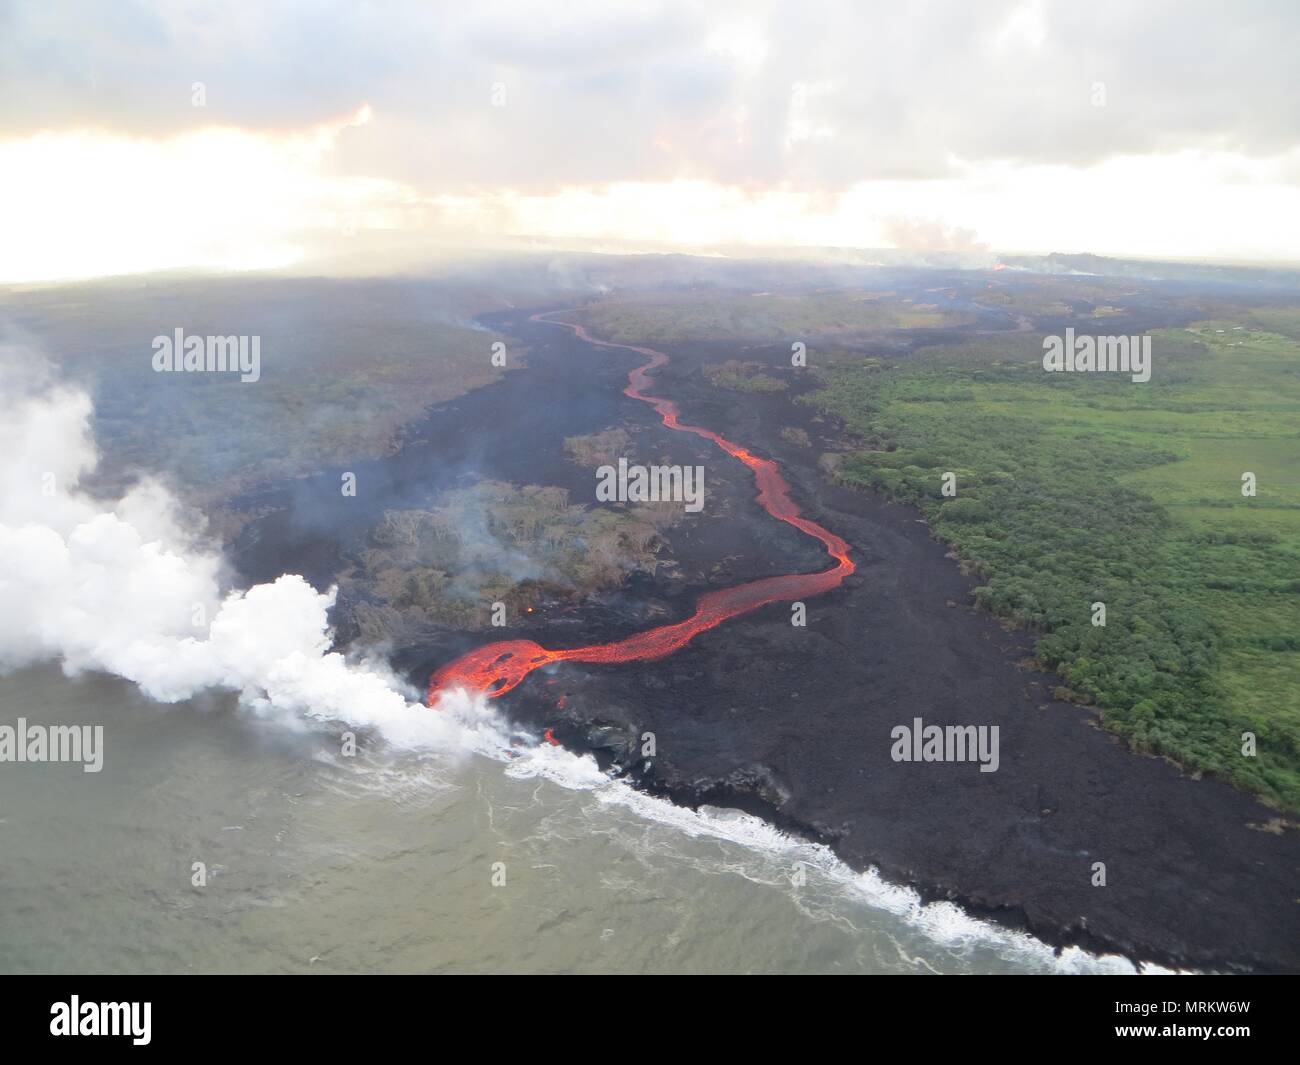 Lava and poisonous sulfur dioxide plumes rise as molten magma reaches the ocean from the eruption of the Kilauea volcano May 23, 2018 in Pahoa, Hawaii. Hot lava entering the ocean creates a dense white plume called 'laze' (short for 'lava haze'). Laze is formed as hot lava boils seawater to dryness. The process leads to a series of chemical reactions that create a billowing white cloud composed of a condensed seawater steam, hydrochloric acid gas, and tiny shards of volcanic glass. The cloud is as corrosive as dilute battery acid, and should be avoided. Stock Photo